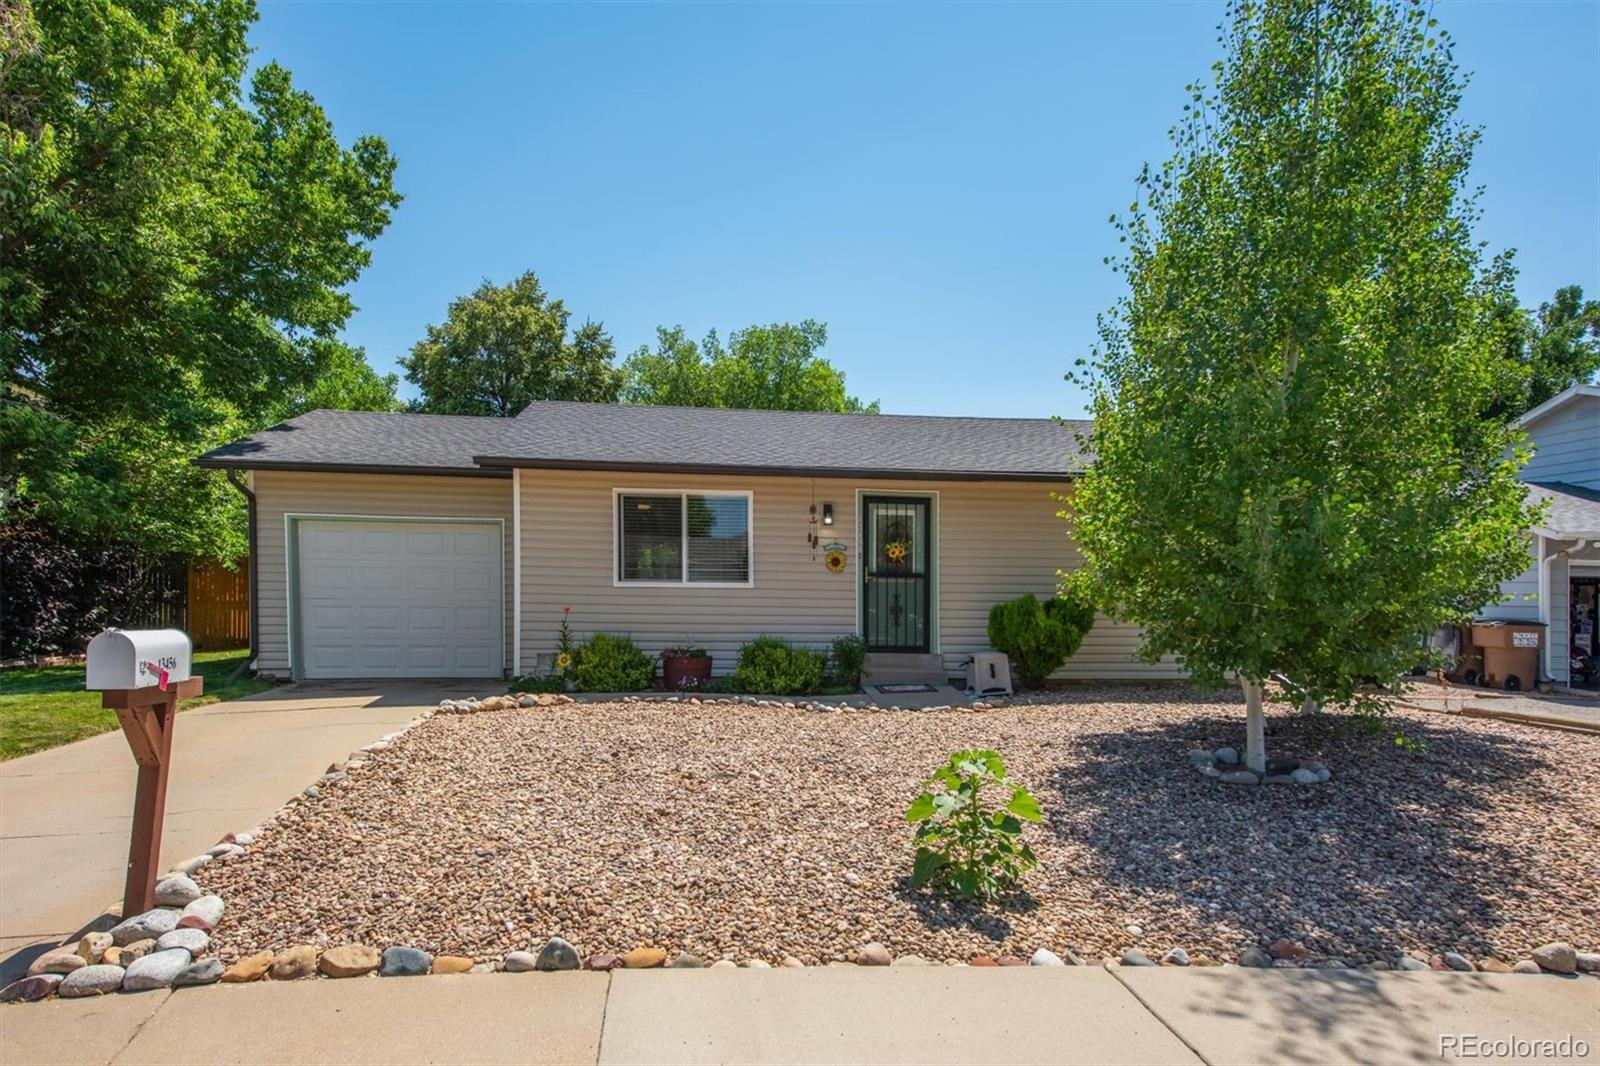 13456  bryant way, Broomfield sold home. Closed on 2024-04-19 for $425,000.